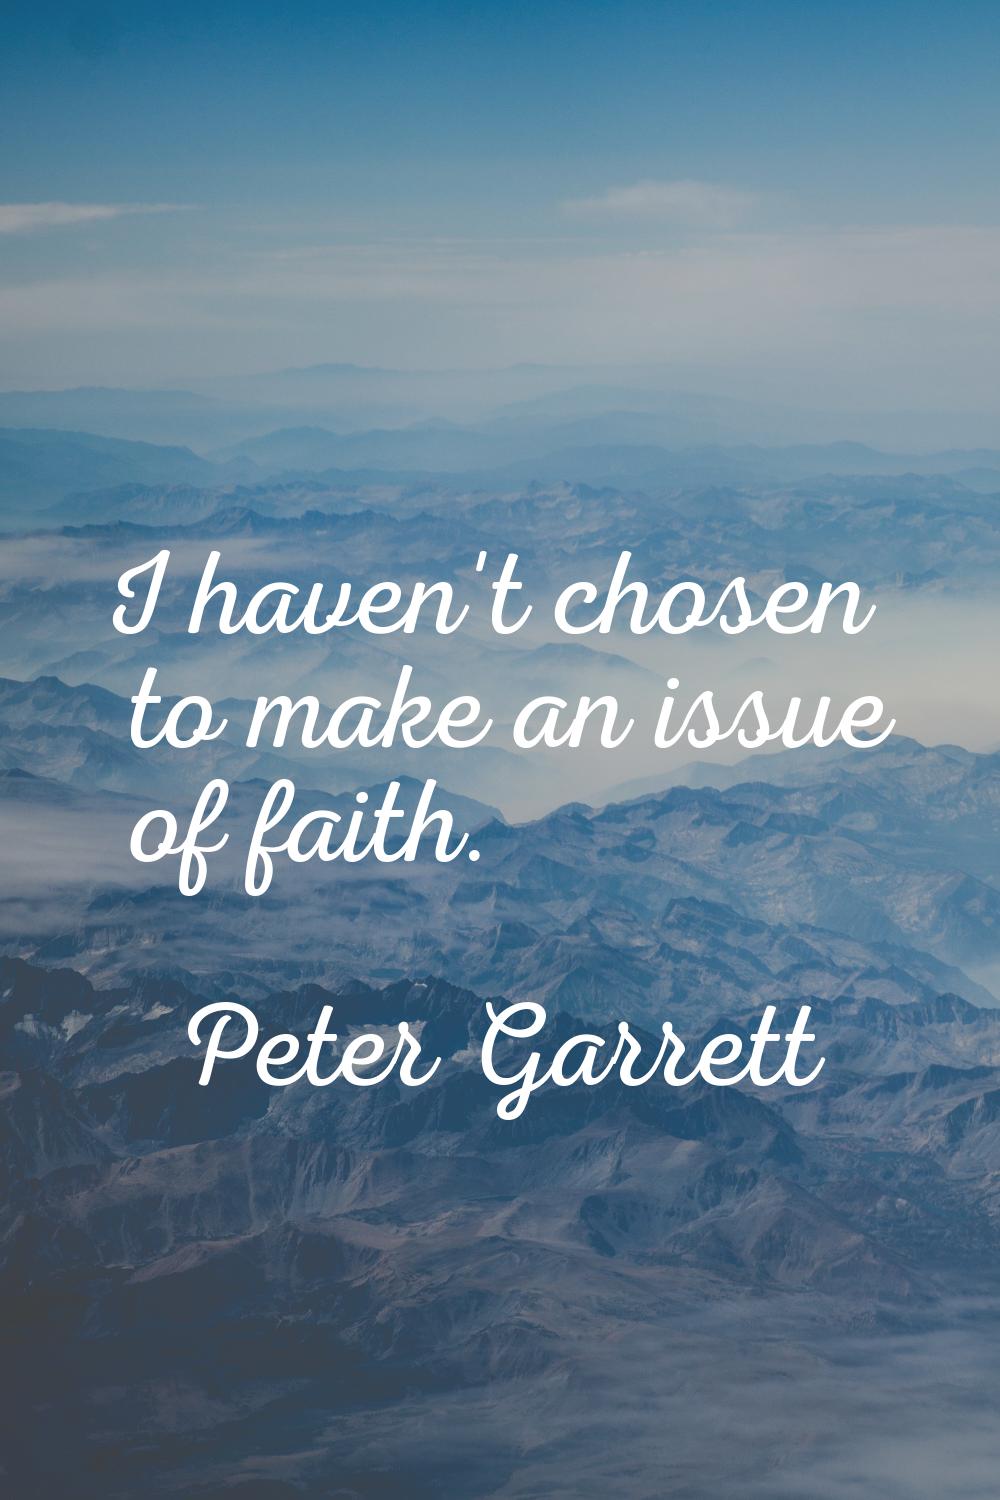 I haven't chosen to make an issue of faith.